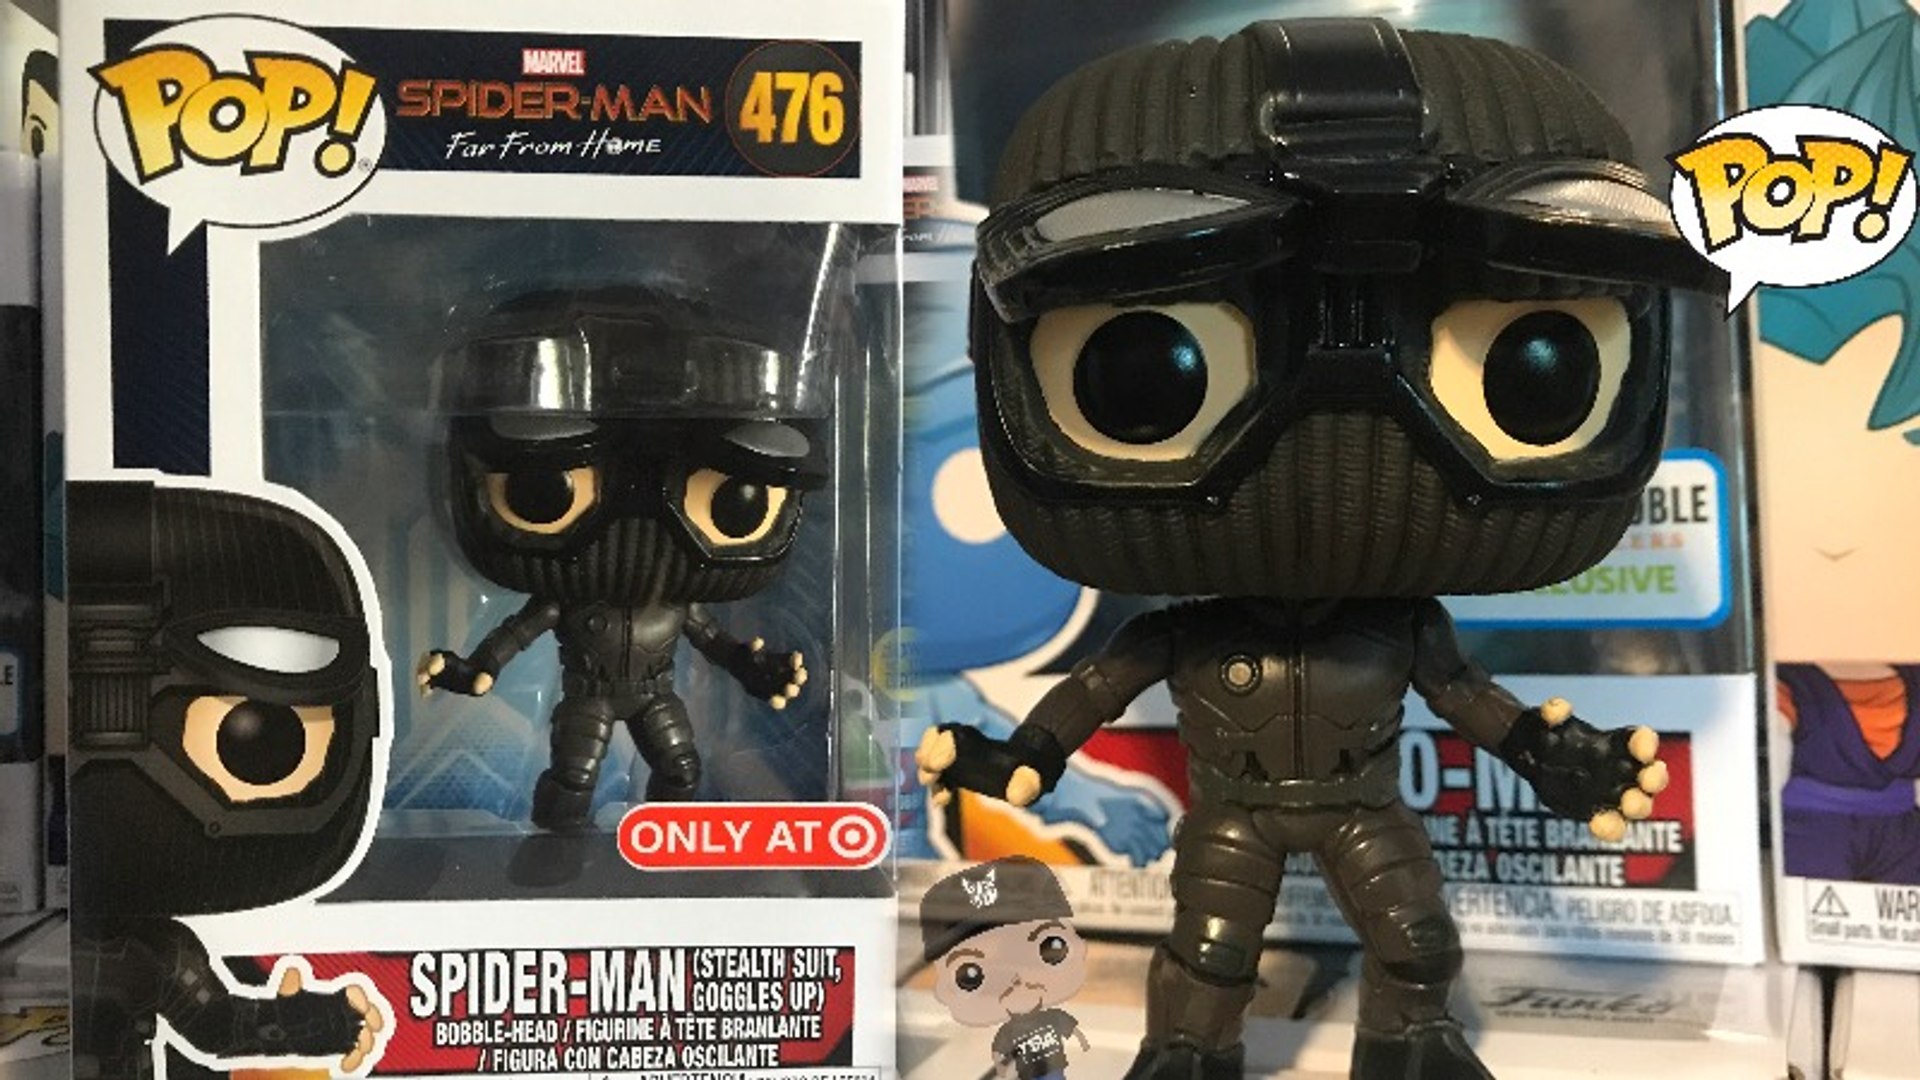 spider man far from home funko pop target exclusive